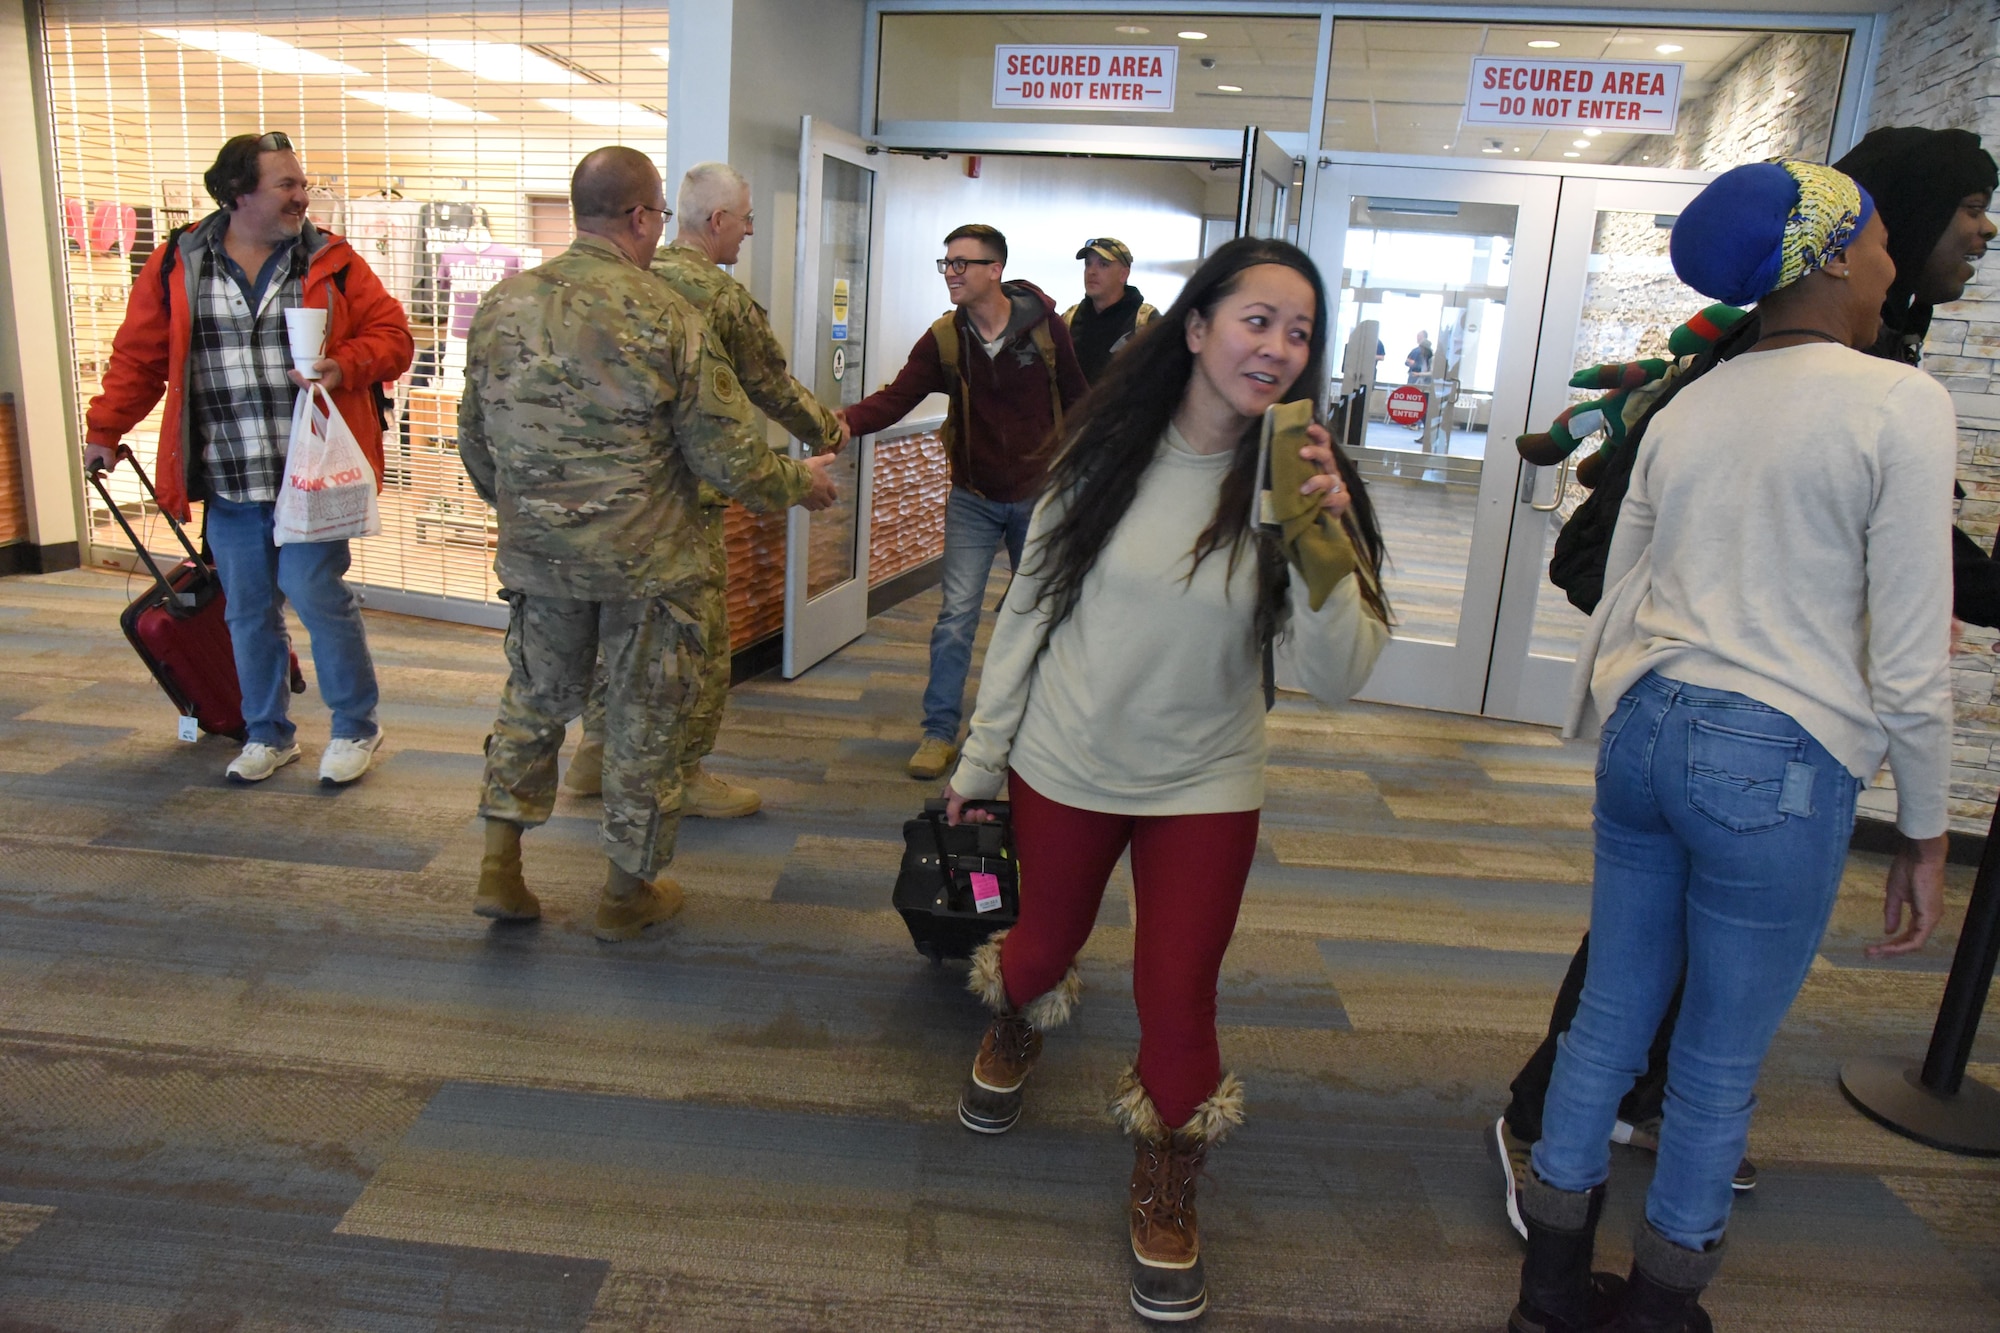 Twelve members of the 219th Security Forces Squadron returned home to the Minot International Airport, Minot, N.D., upon completion of their six-month deployment to southwest Asia Feb. 2, 2018.